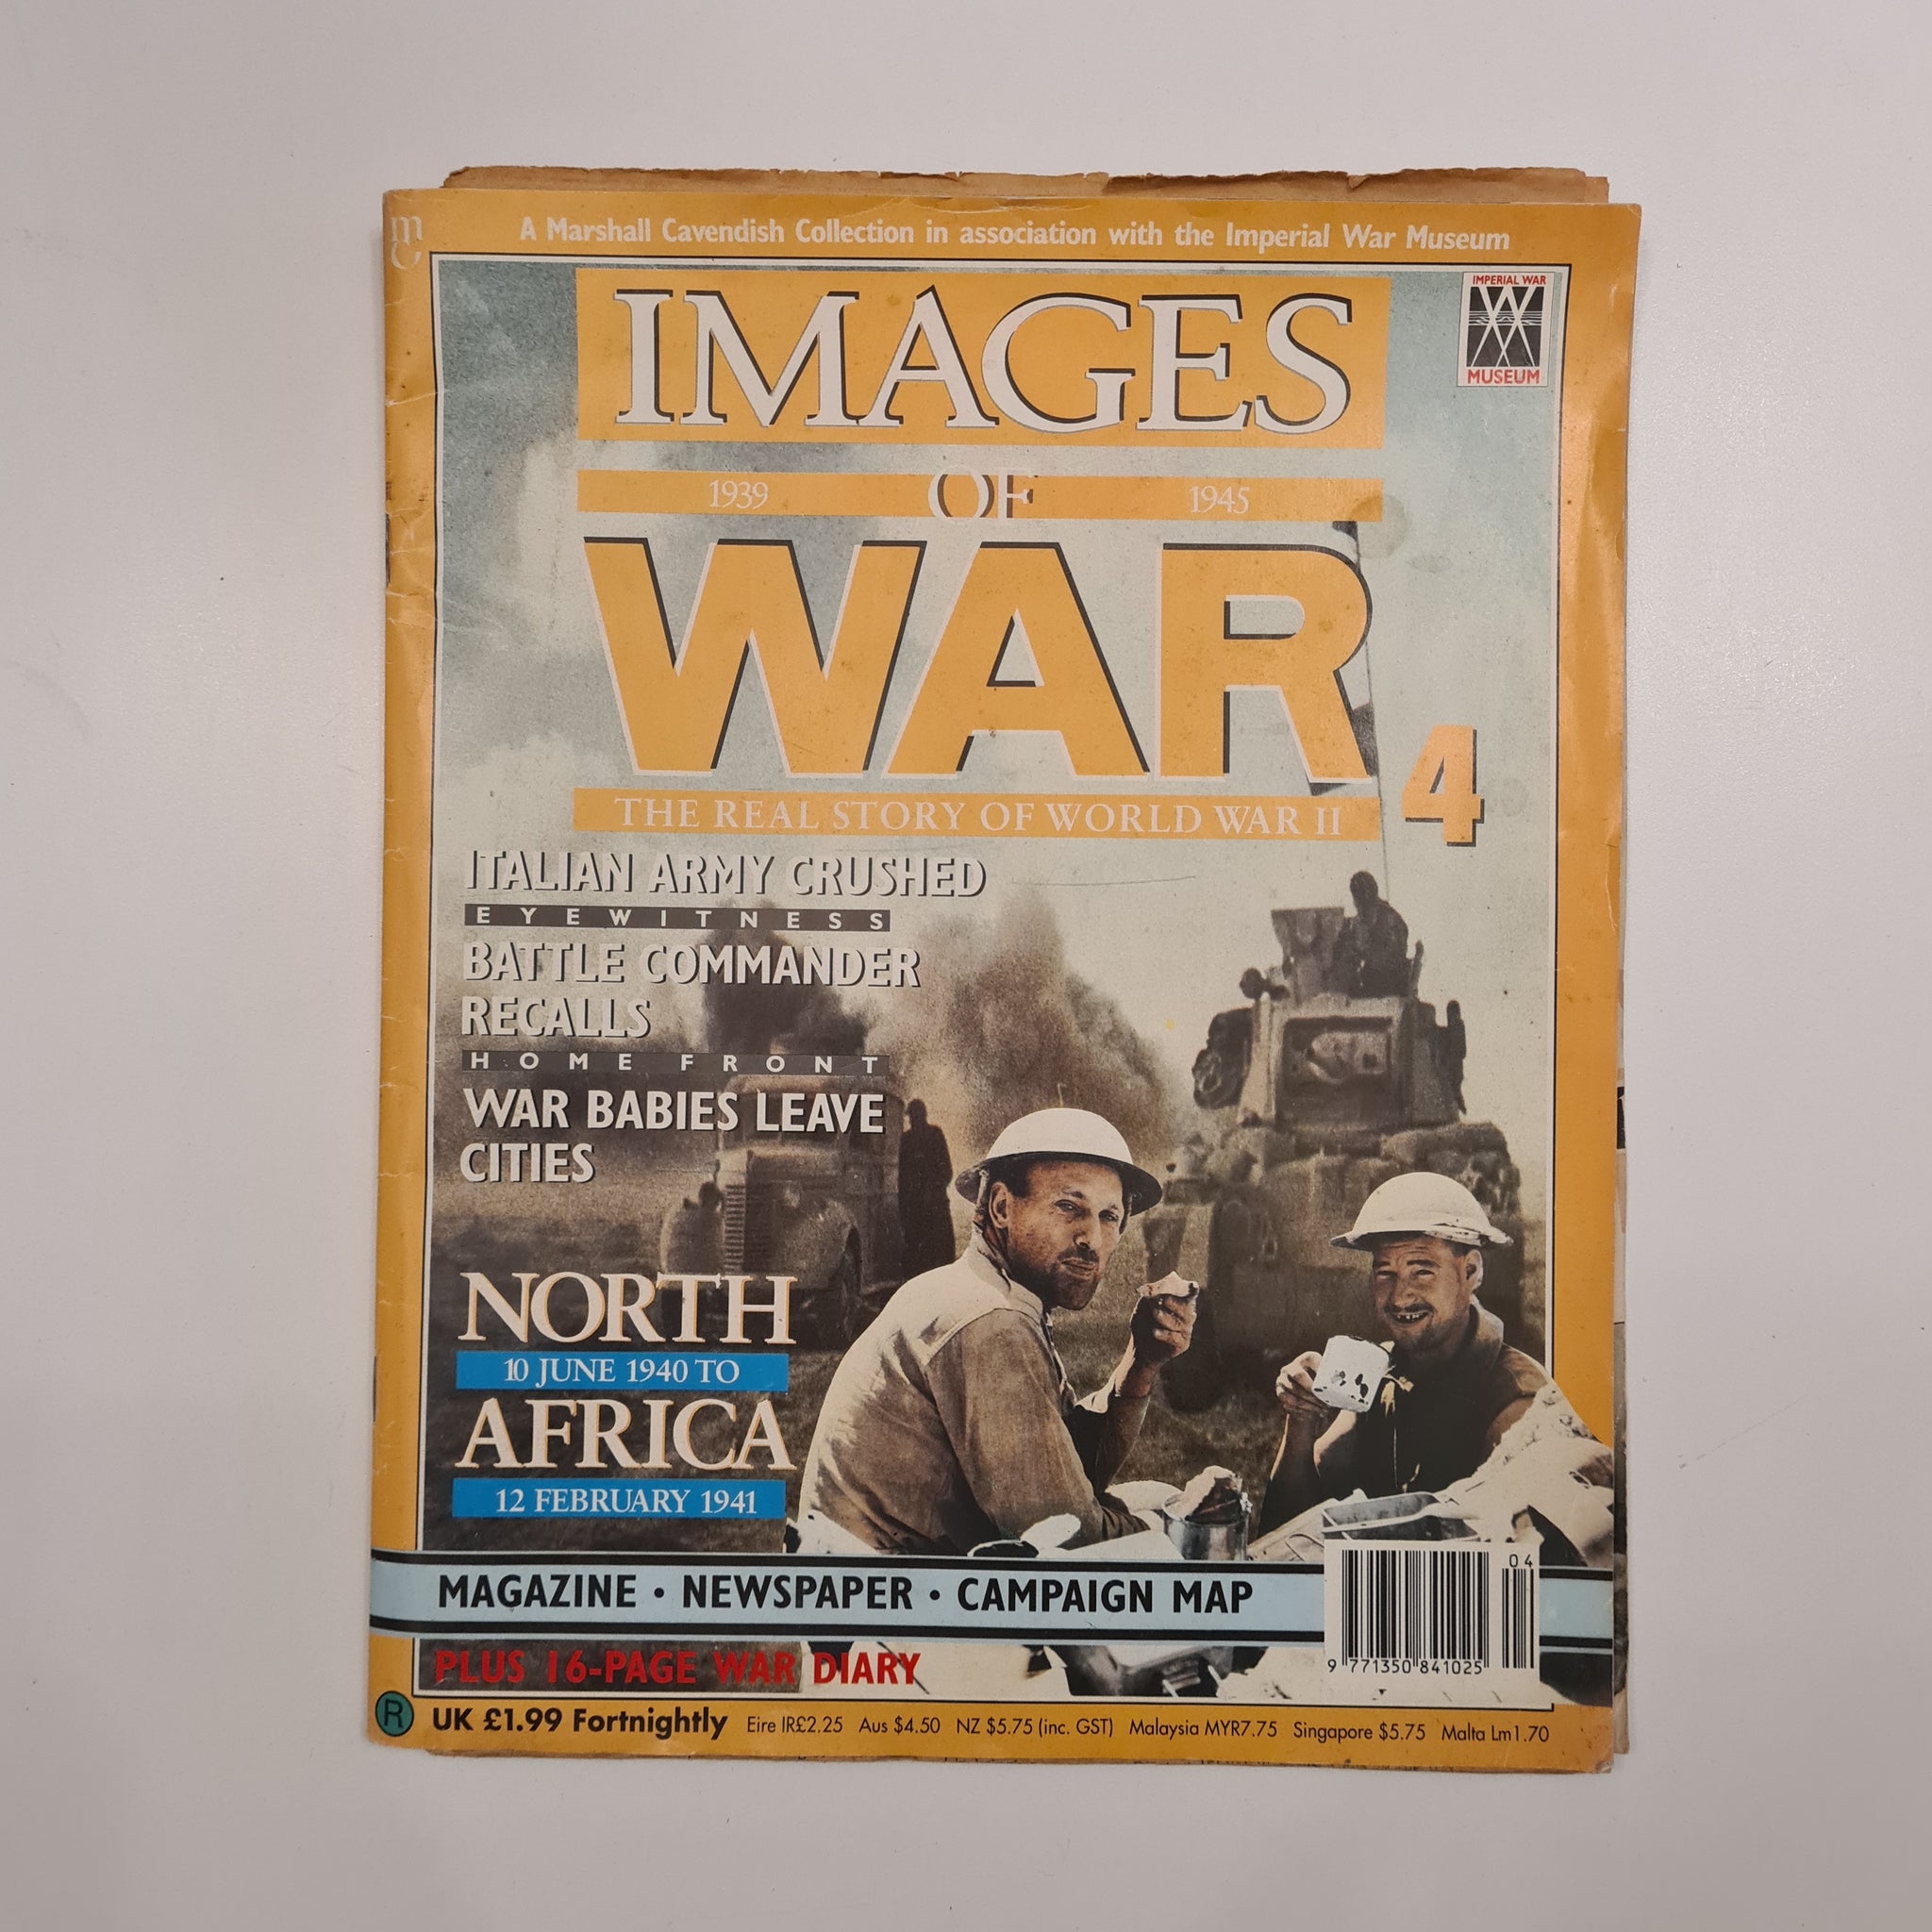 Image of War, 1939-1945, The real story of world war-II